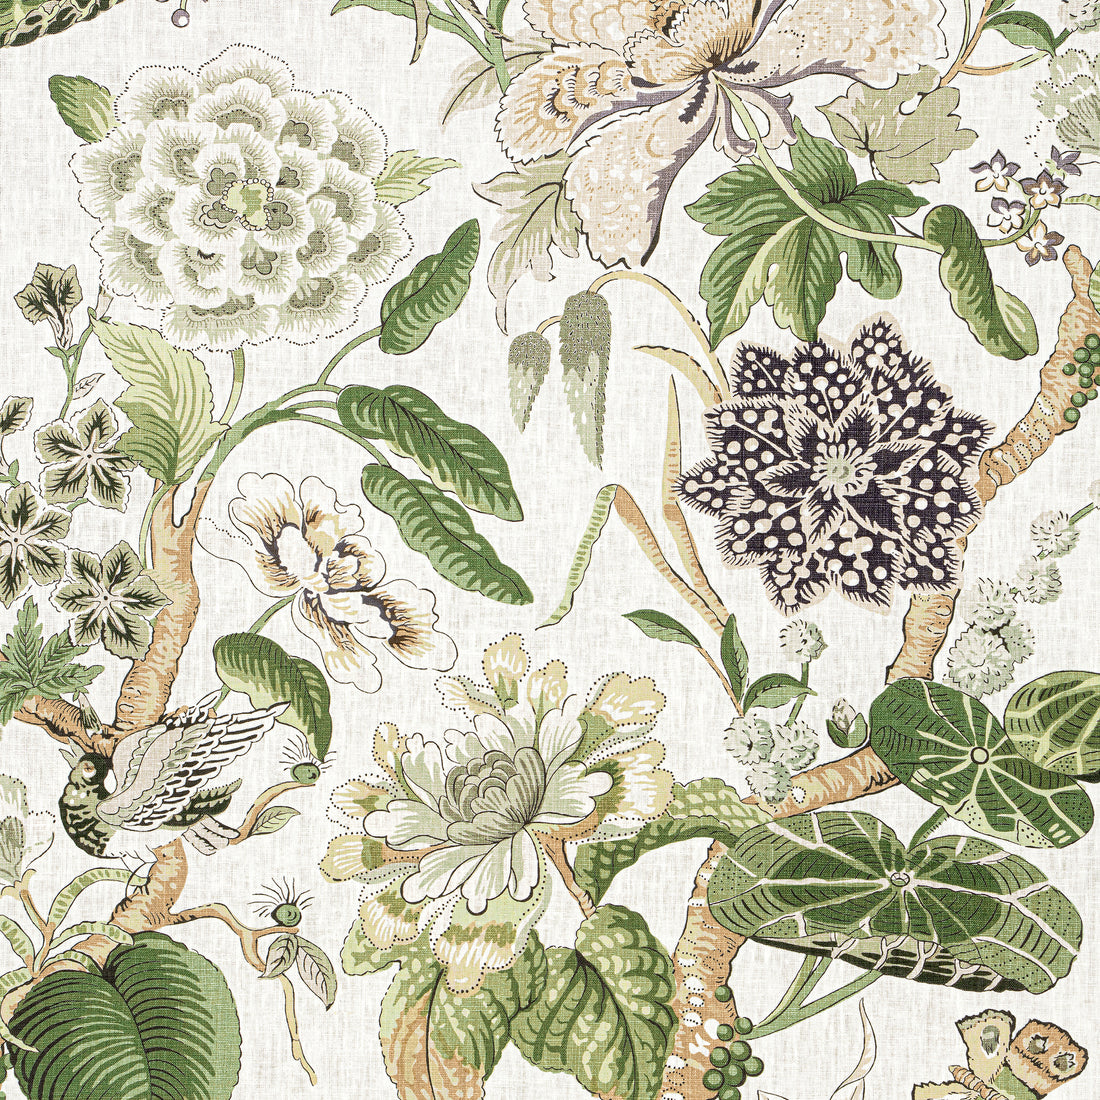 Hill Garden fabric in white and green - pattern number F913656 - by Thibaut in the Grand Palace collection